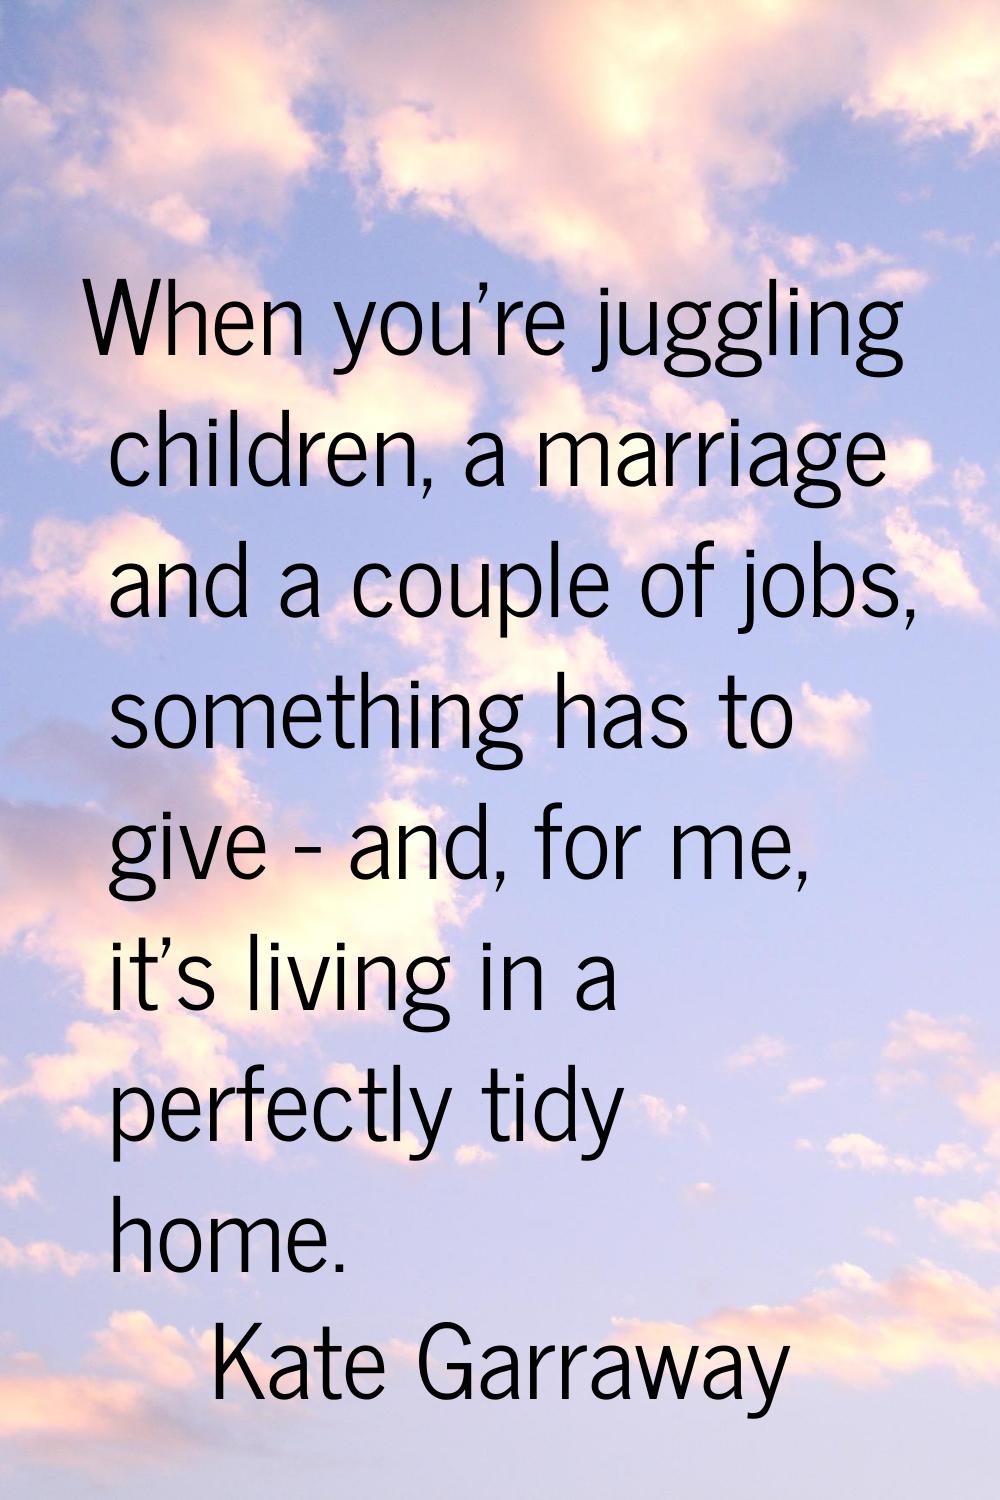 When you're juggling children, a marriage and a couple of jobs, something has to give - and, for me